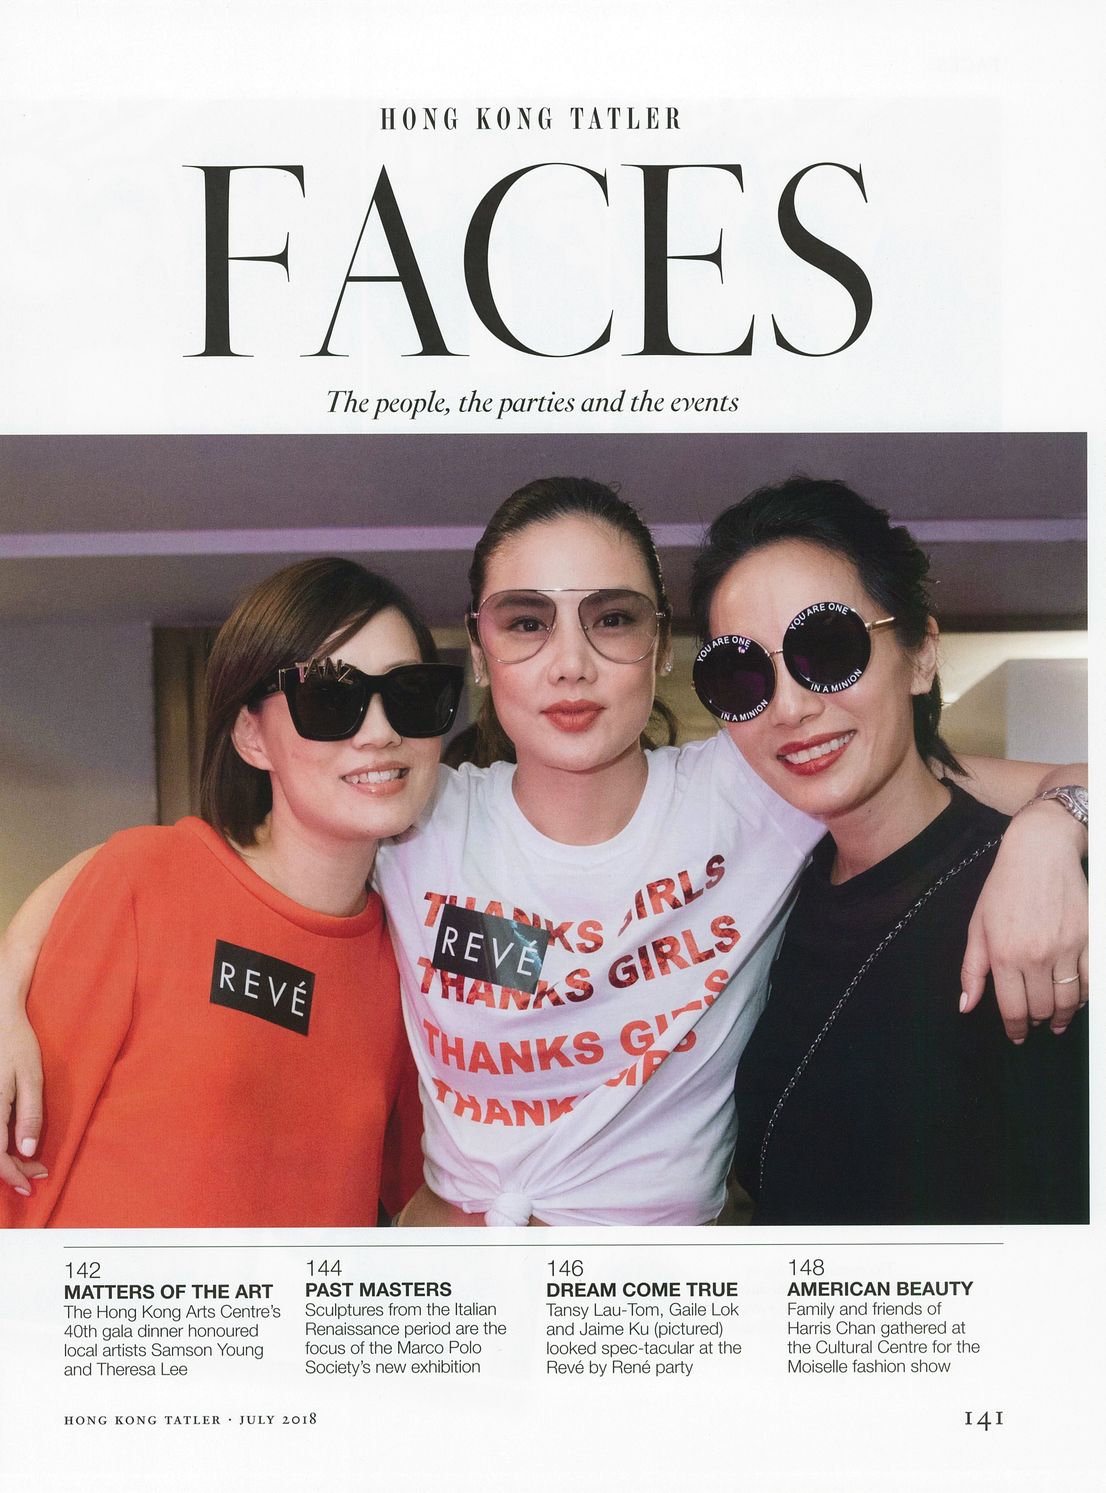 REVE by RENE launch party featured in Hong Kong Tatler